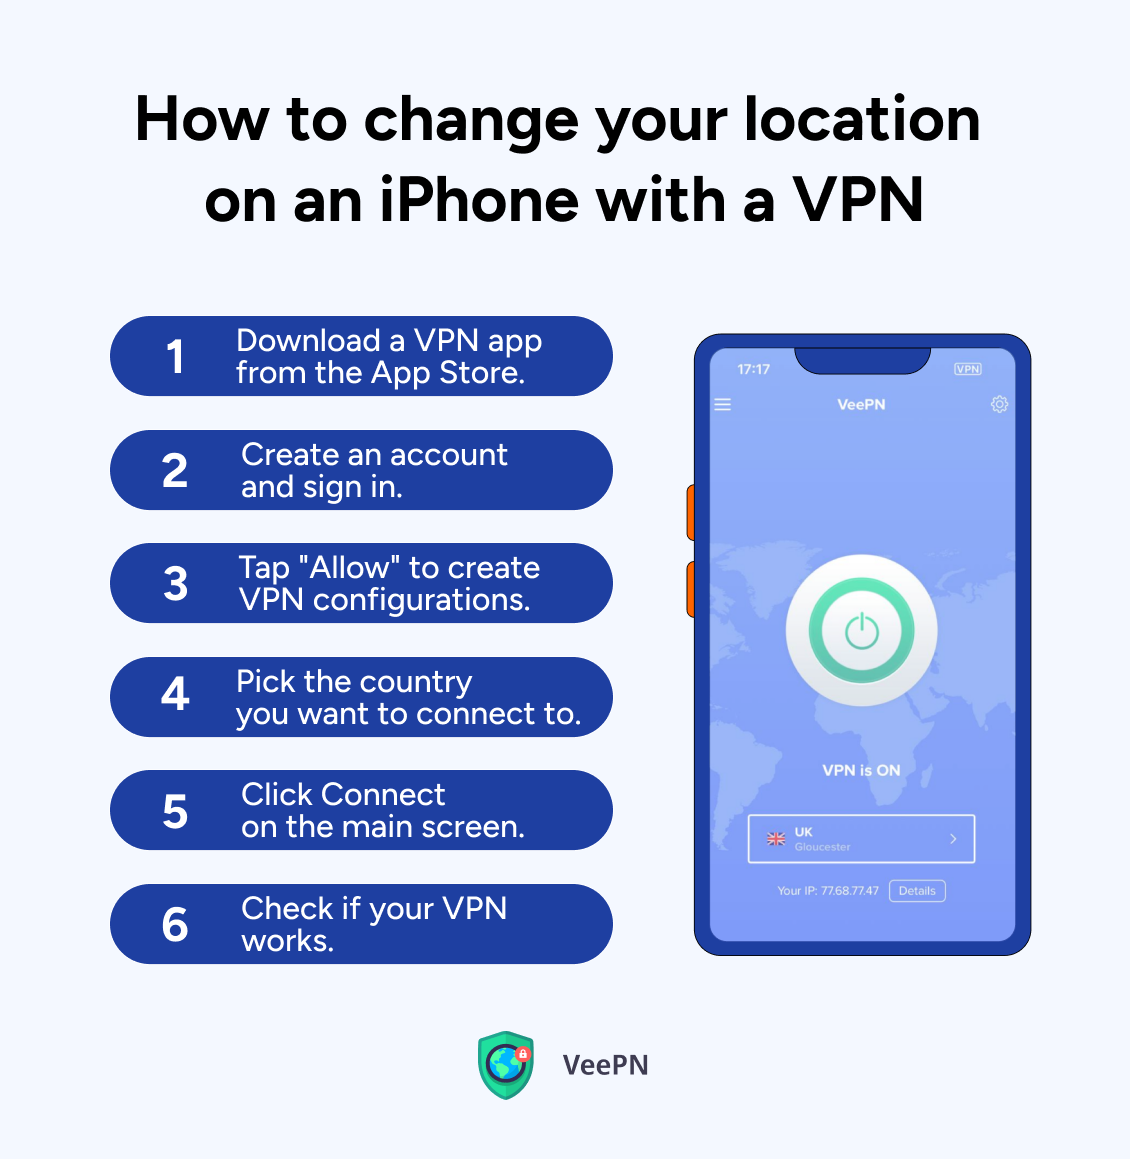 How to change iPhone location with a VPN